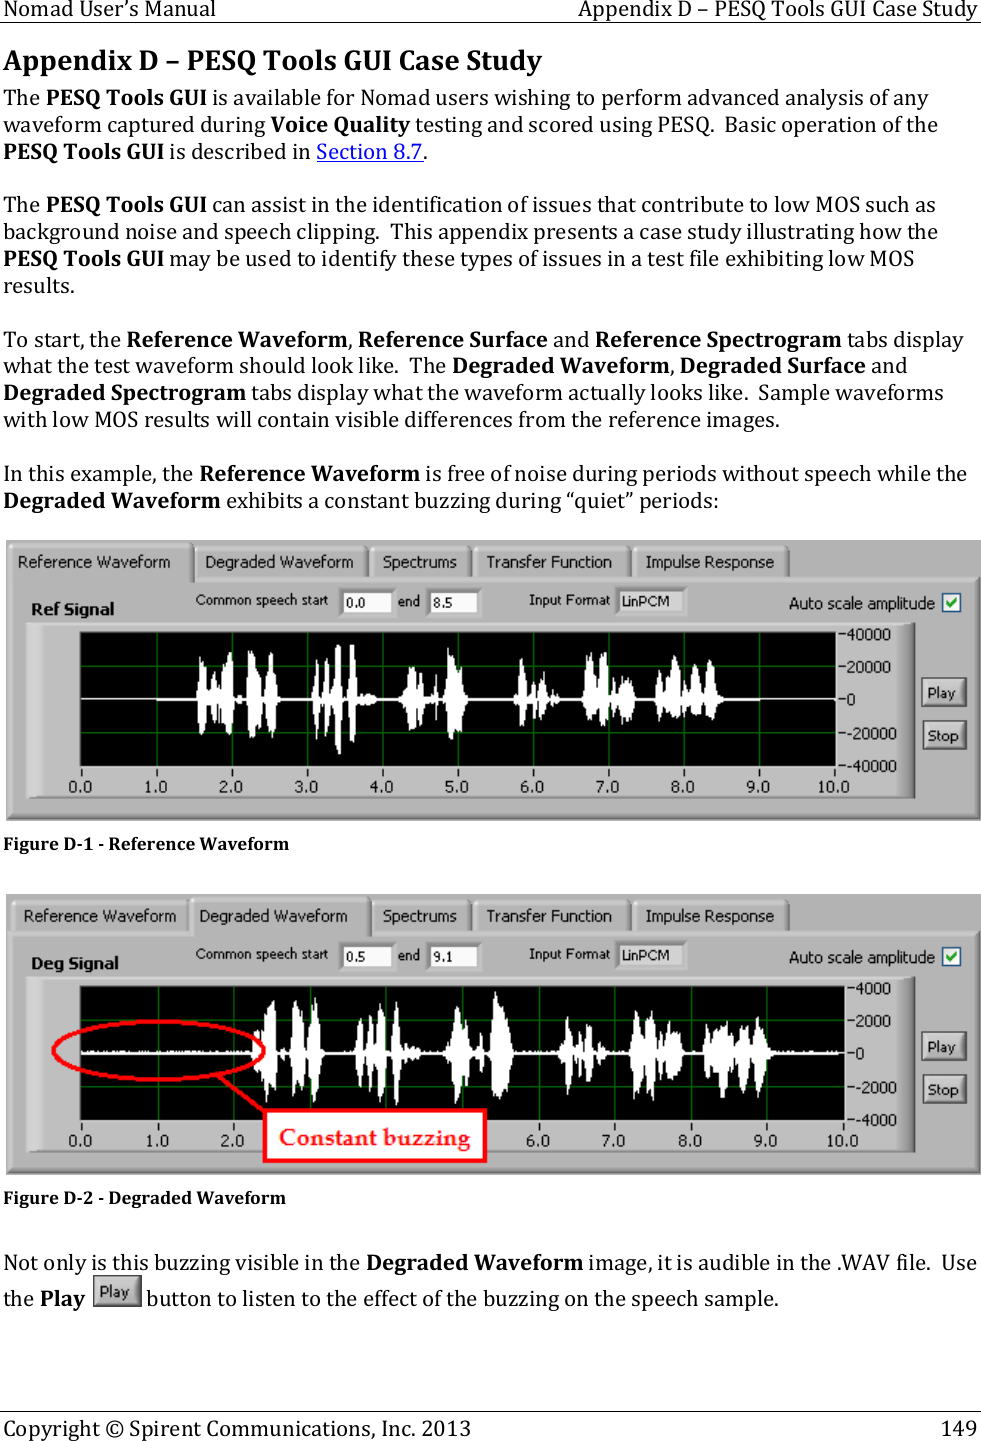  Nomad User’s Manual  Appendix D – PESQ Tools GUI Case Study Copyright © Spirent Communications, Inc. 2013    149  Appendix D – PESQ Tools GUI Case Study The PESQ Tools GUI is available for Nomad users wishing to perform advanced analysis of any waveform captured during Voice Quality testing and scored using PESQ.  Basic operation of the PESQ Tools GUI is described in Section 8.7.    The PESQ Tools GUI can assist in the identification of issues that contribute to low MOS such as background noise and speech clipping.  This appendix presents a case study illustrating how the PESQ Tools GUI may be used to identify these types of issues in a test file exhibiting low MOS results.  To start, the Reference Waveform, Reference Surface and Reference Spectrogram tabs display what the test waveform should look like.  The Degraded Waveform, Degraded Surface and Degraded Spectrogram tabs display what the waveform actually looks like.  Sample waveforms with low MOS results will contain visible differences from the reference images.  In this example, the Reference Waveform is free of noise during periods without speech while the Degraded Waveform exhibits a constant buzzing during “quiet” periods:   Figure D-1 - Reference Waveform   Figure D-2 - Degraded Waveform  Not only is this buzzing visible in the Degraded Waveform image, it is audible in the .WAV file.  Use the Play   button to listen to the effect of the buzzing on the speech sample.     